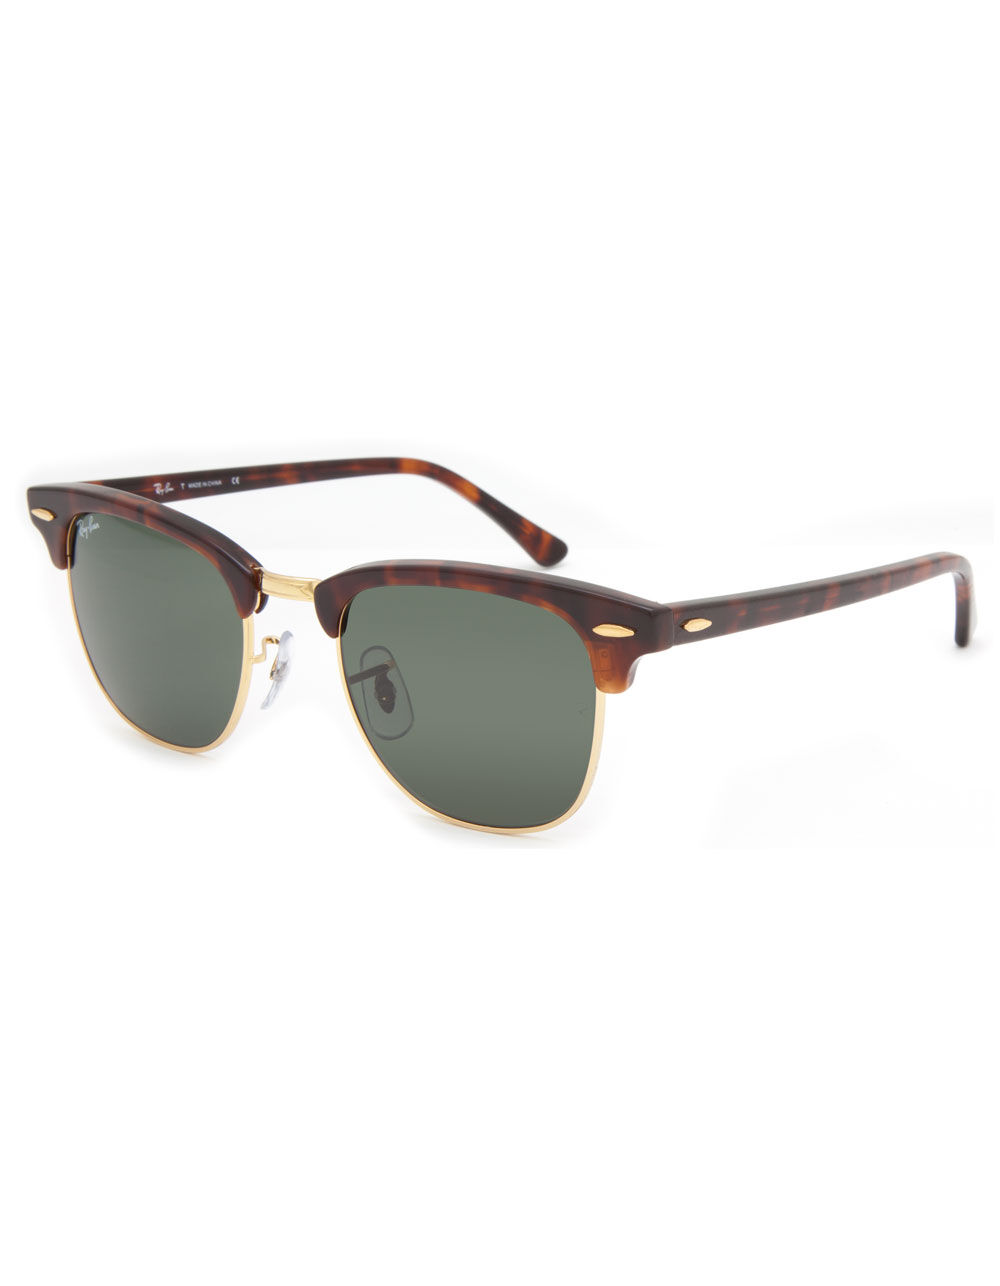 RAY-BAN Clubmaster Sunglasses - TORTO | Tillys